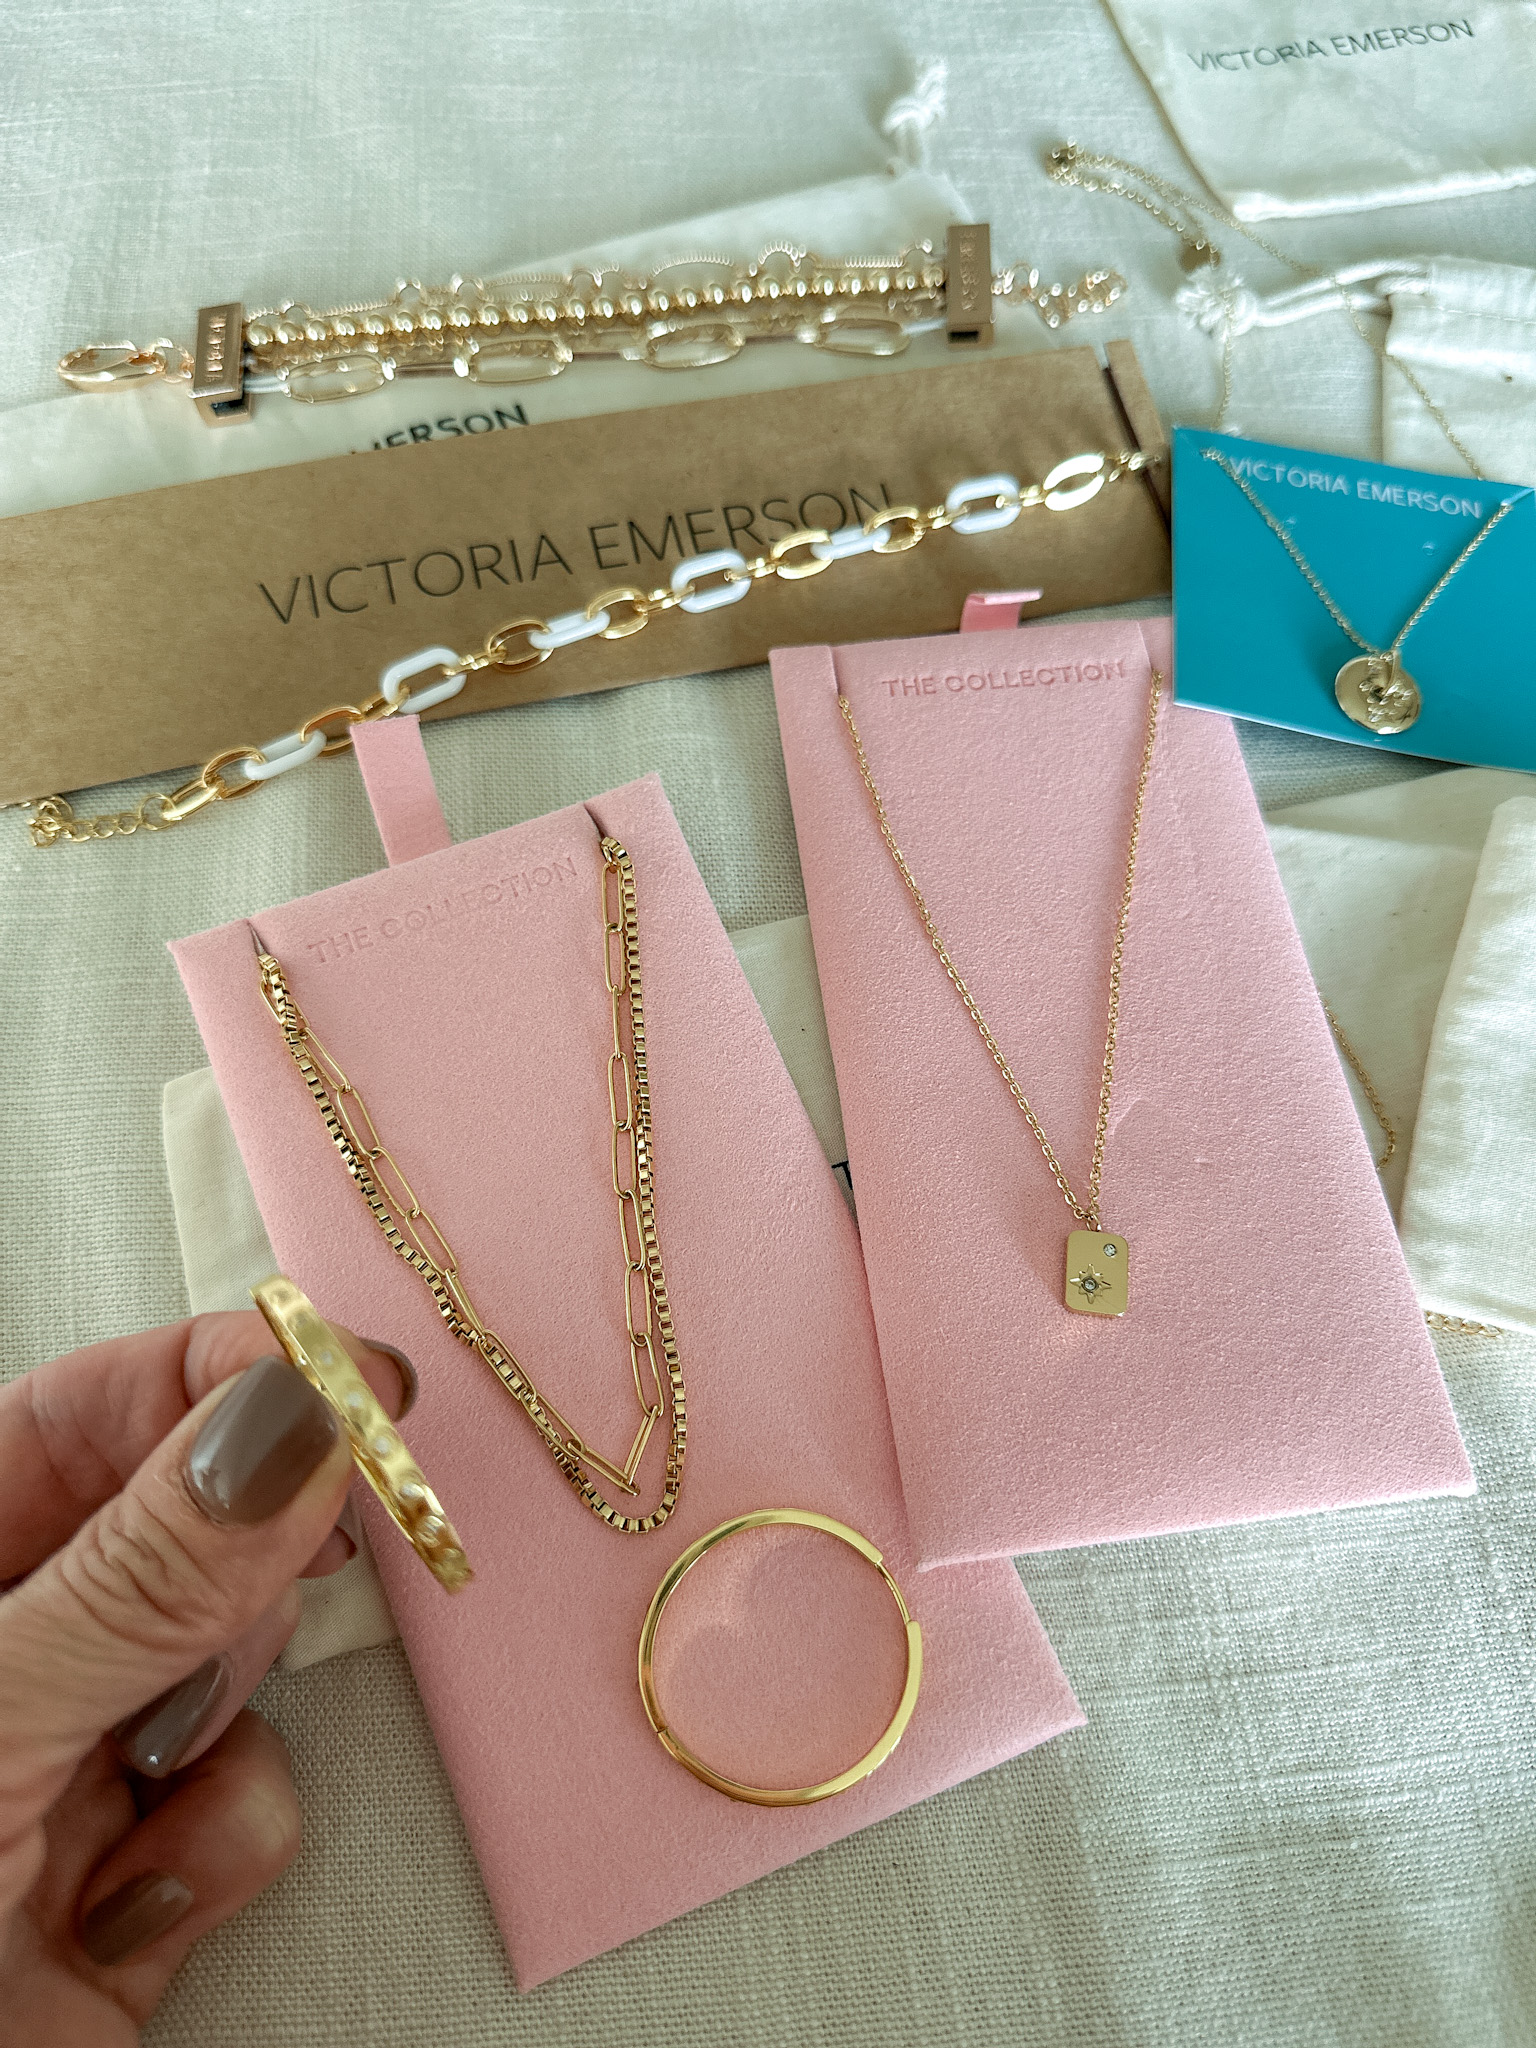 valentines gifts, jewelry, victoria emerson, gold jewelry, necklaces, earrings, hoops, bracelets 